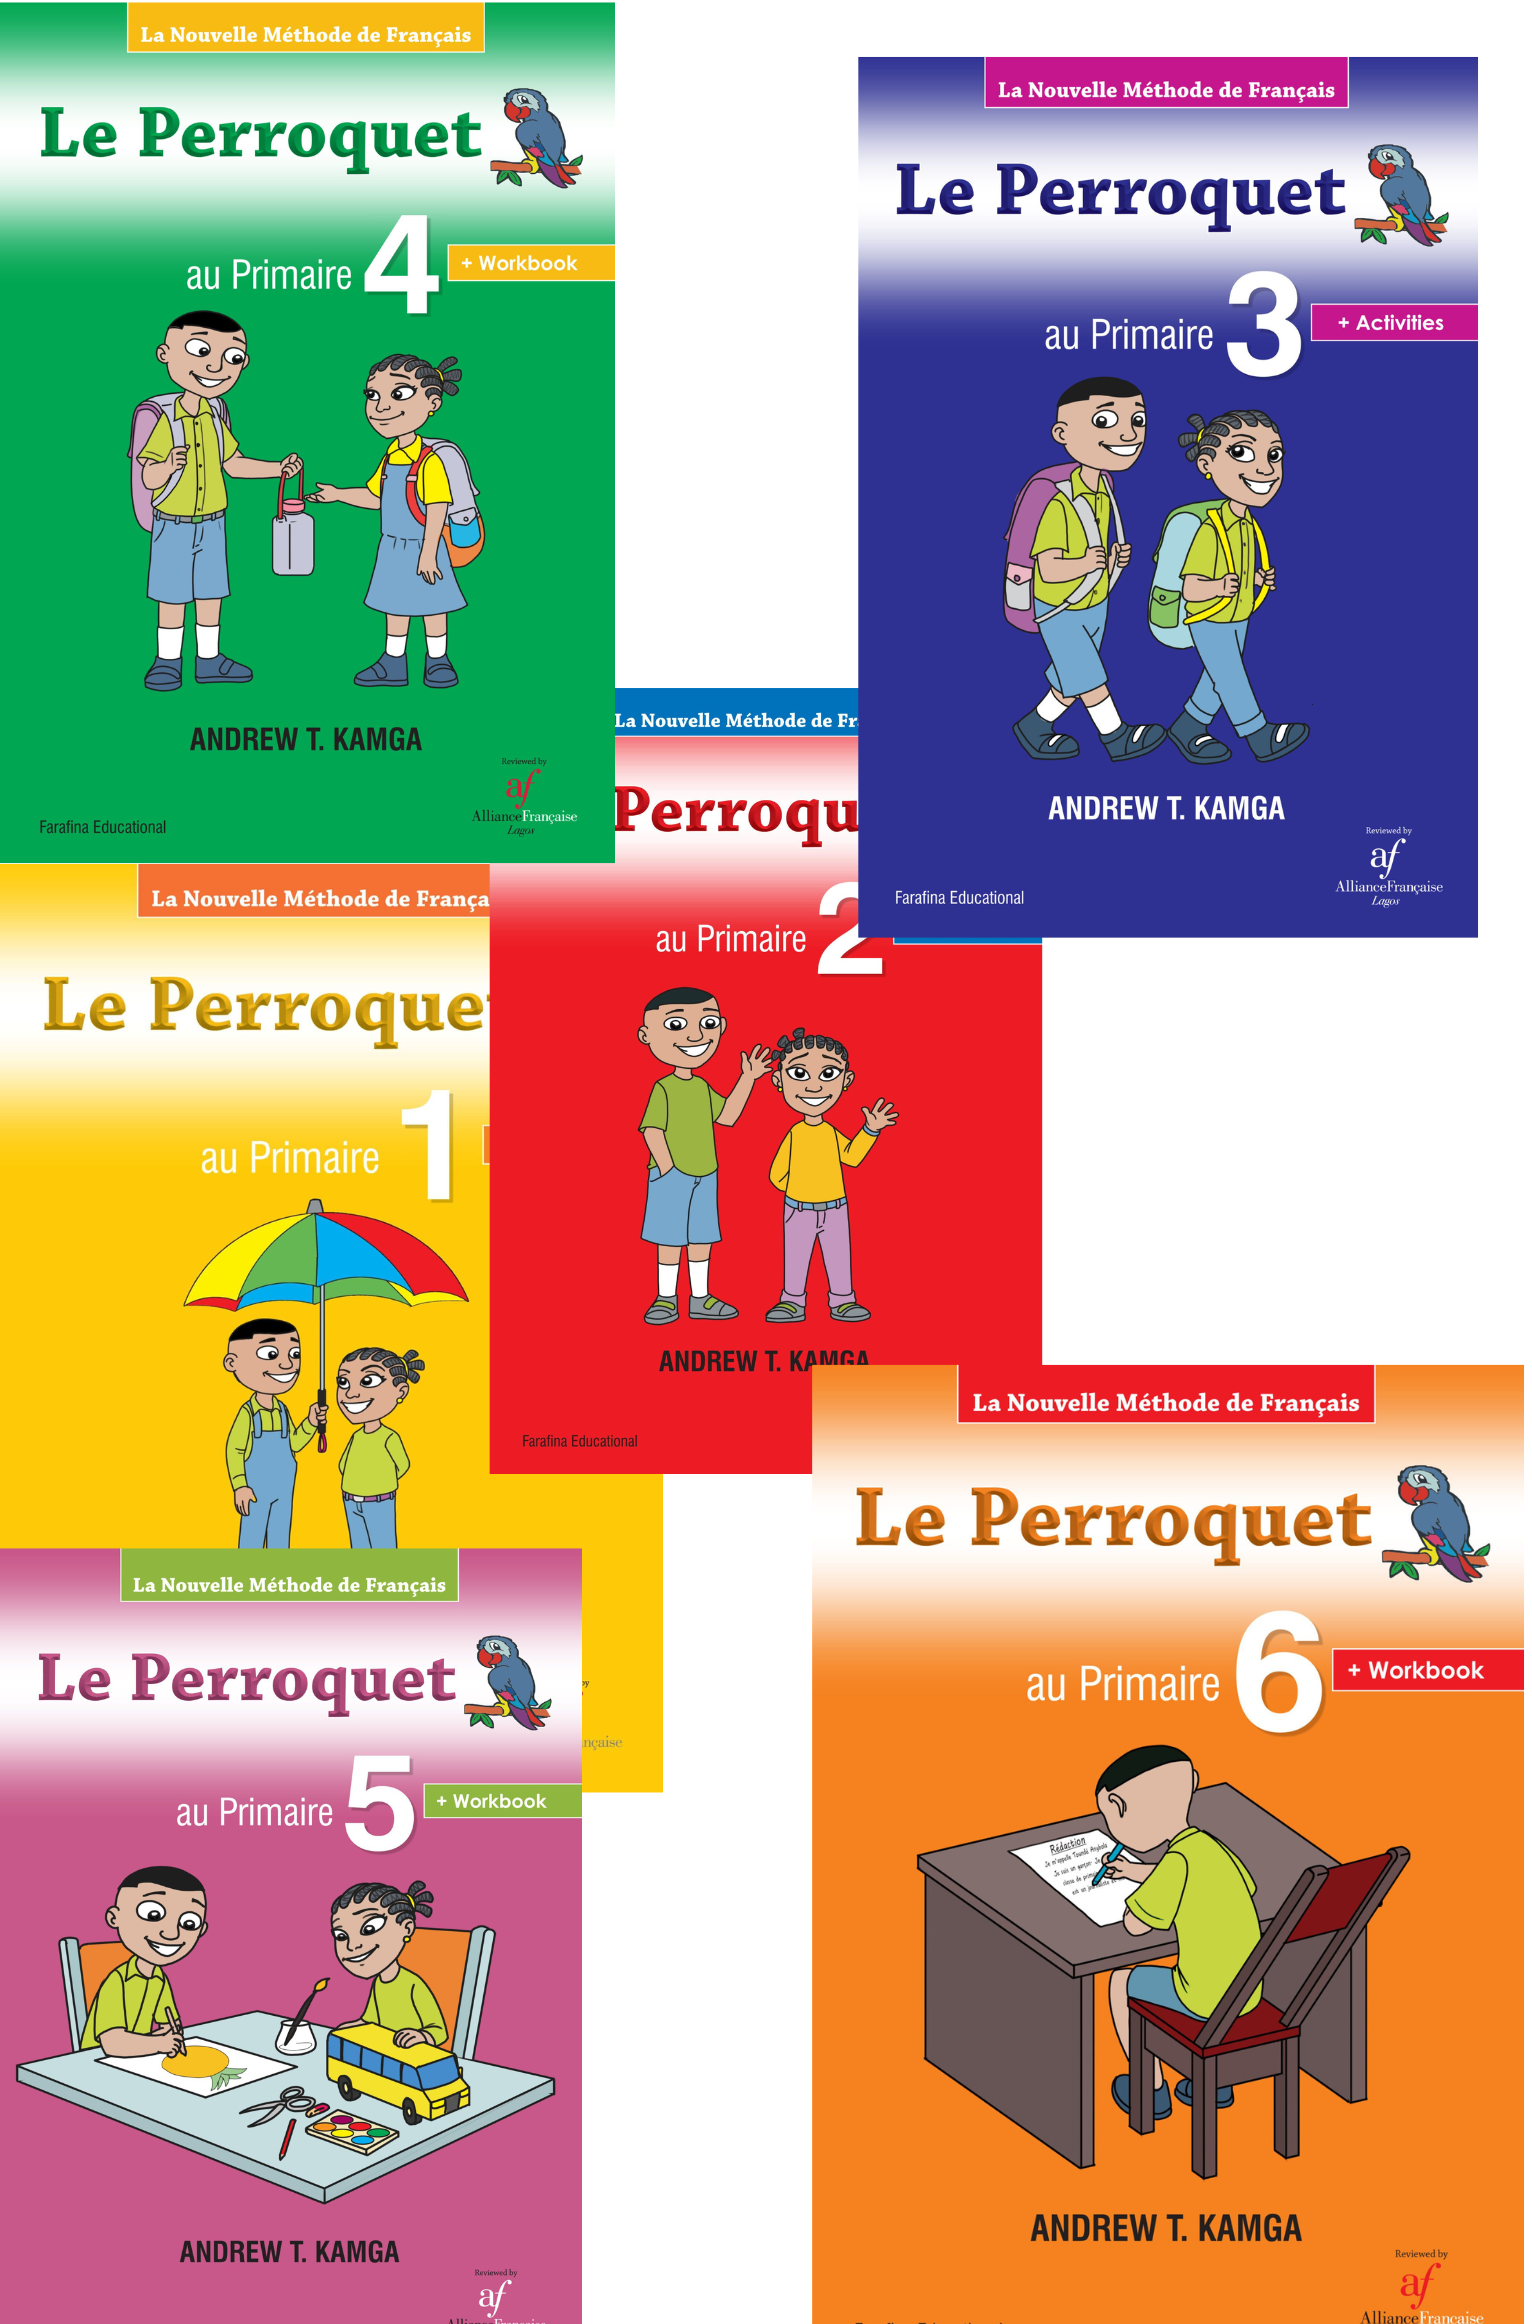 Untitled design 22 Le Perroquet – French Textbooks for Primary Schools (Au Primaire 1-6)